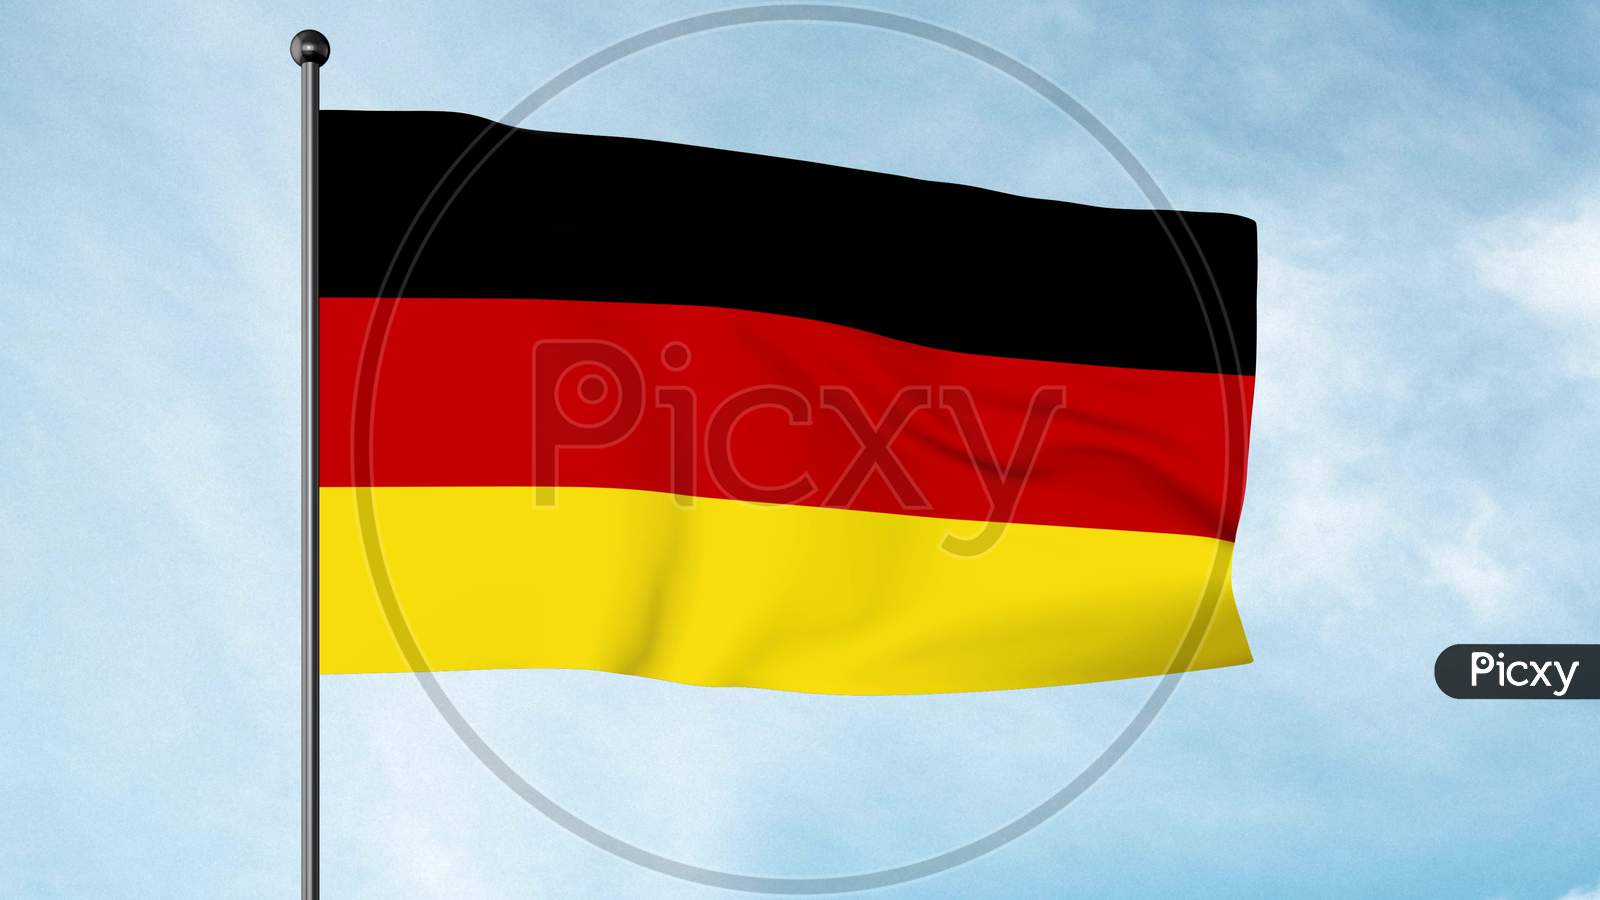 3D Illustration Of The Flag Of Germany Is A Tricolour Consisting Of Three Equal Horizontal Bands Displaying The National Colours Of Germany: Black, Red, And Gold